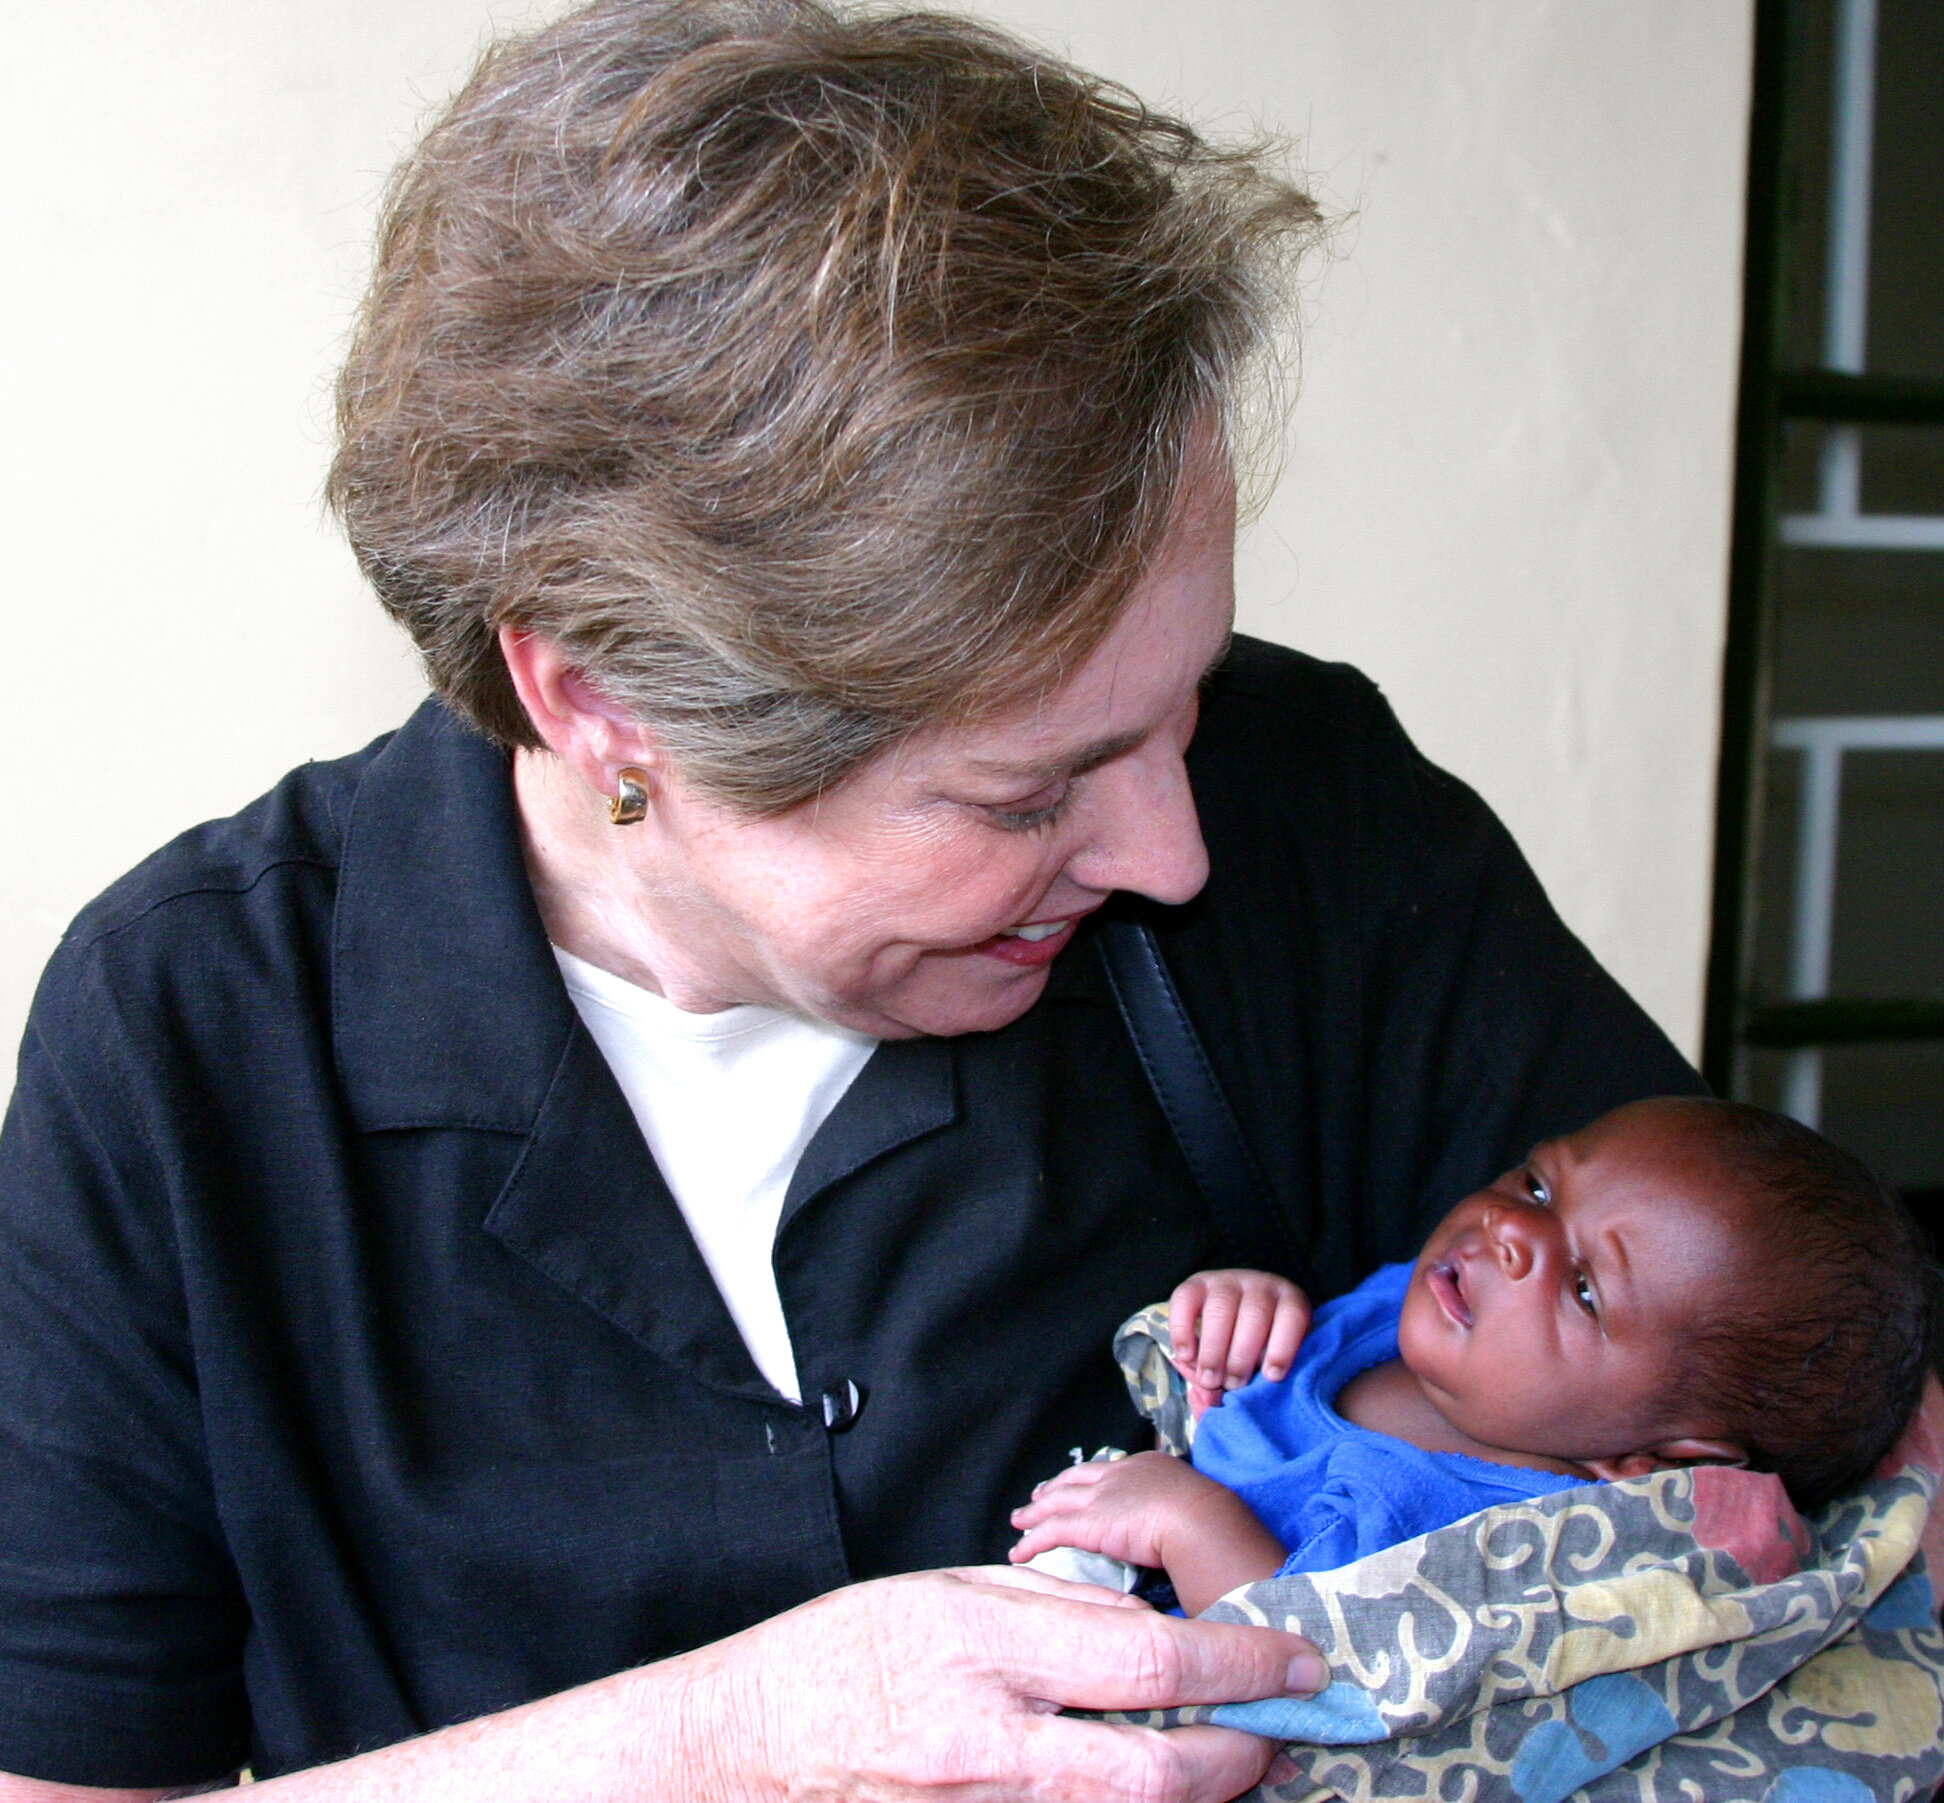 On the anniversary of her birth, we praise God for the lasting legacy of former Kellermann Foundation Executive Director Diane Stanton whose passion for Uganda is admired and greatly missed. Diane was the first American to respond when the Batwa pygm